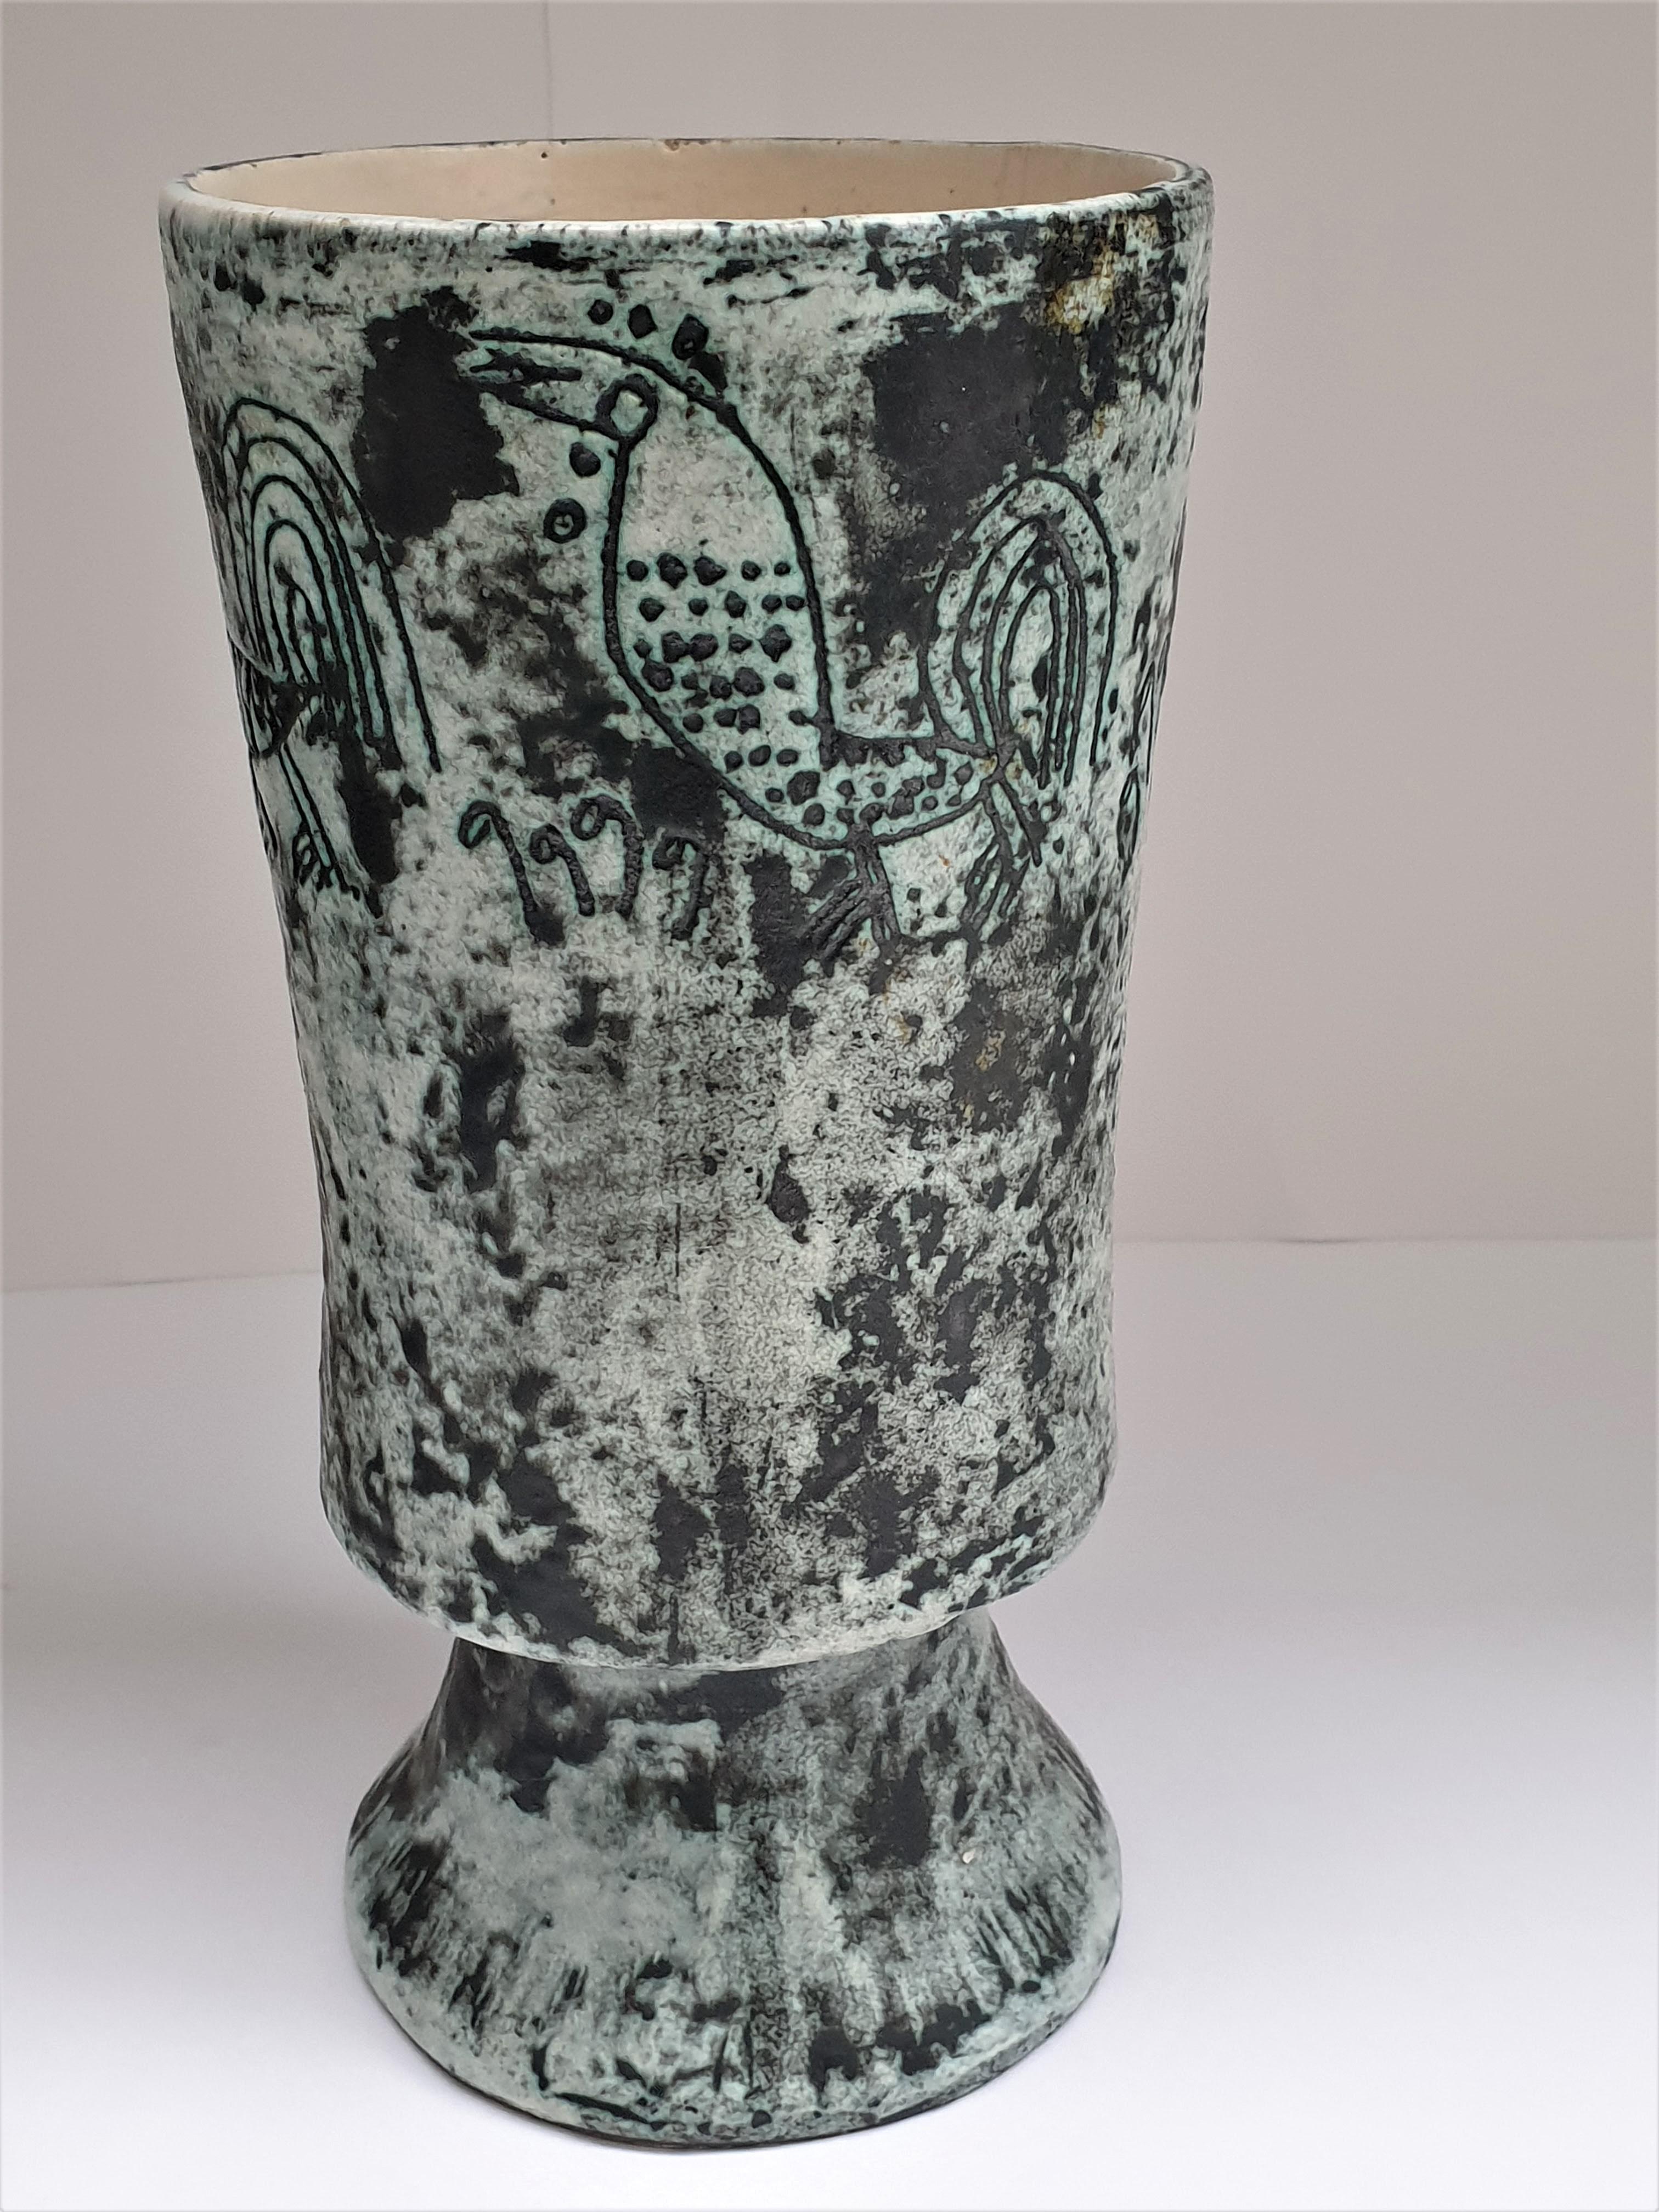 Simple matt glazed ceramic vase by Jacques Blin (1920-1995) depicting stylized birds.

Jacques Blin began making pottery in the late 1940s and his early work made use of modeling techniques, as well as slip casting and stamping, before moving on